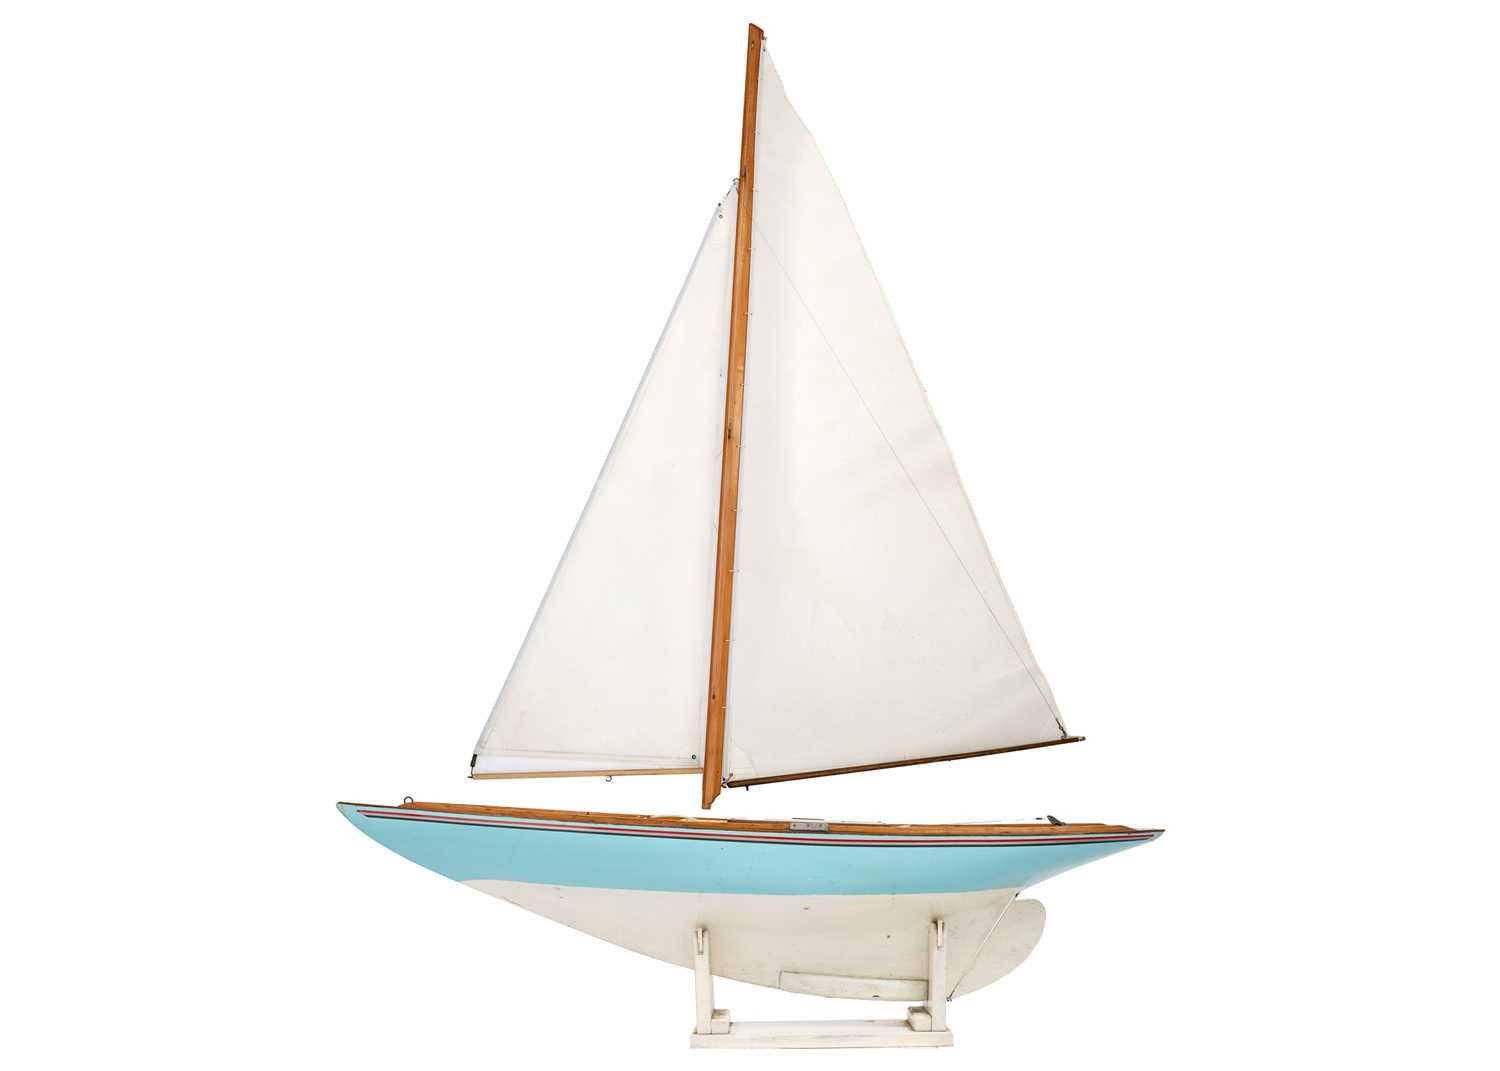 A 3ft 9" pond yacht by Reg Phillips of St Mary's Isles of Scilly.